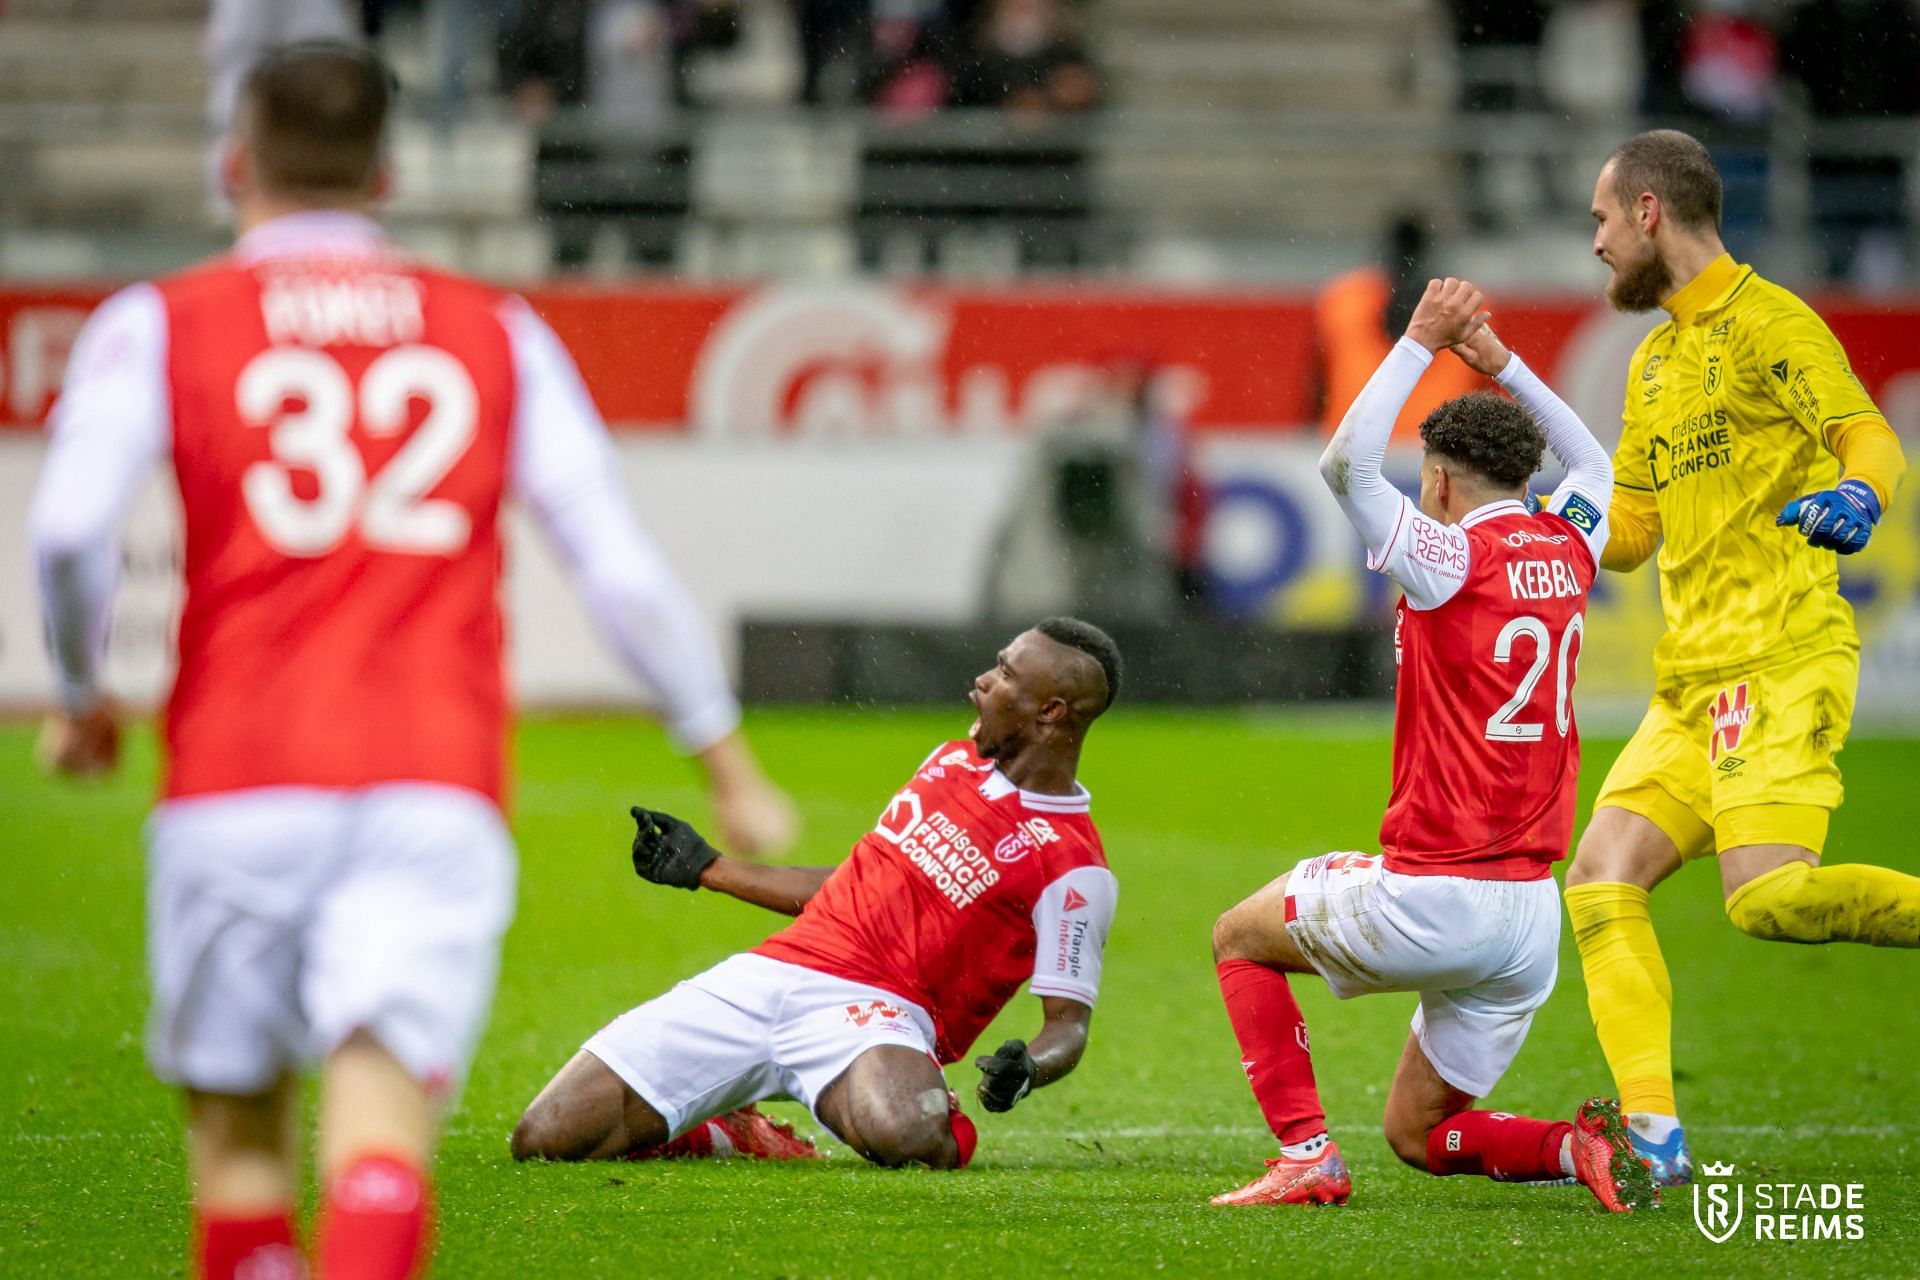 Can Reims come out on top against struggling Saint-Etienne this weekend?